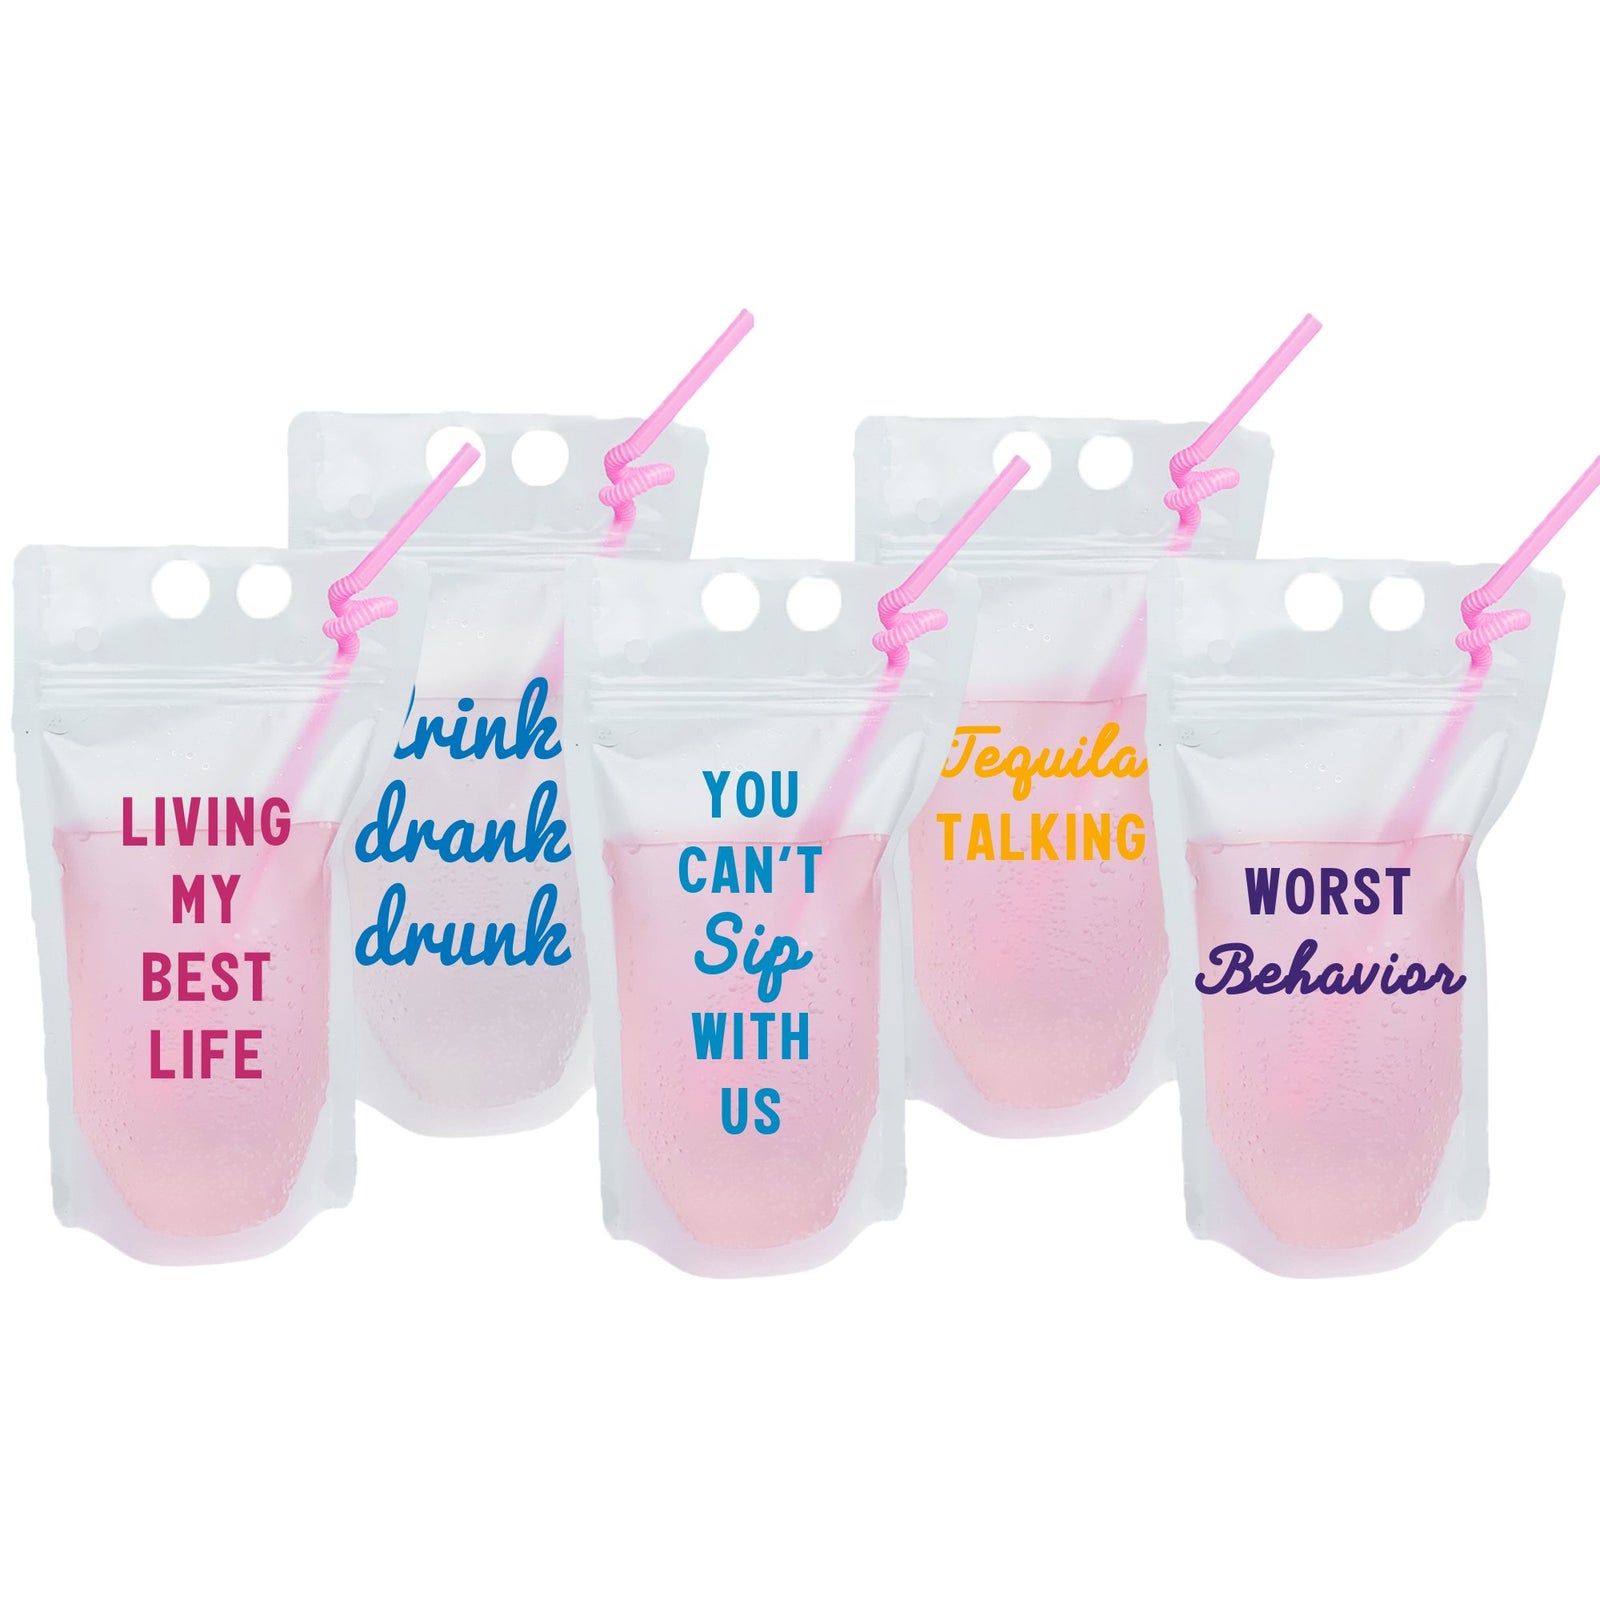 Buy Funny Straw Drinking Glasses Online Best Price in Pakistan